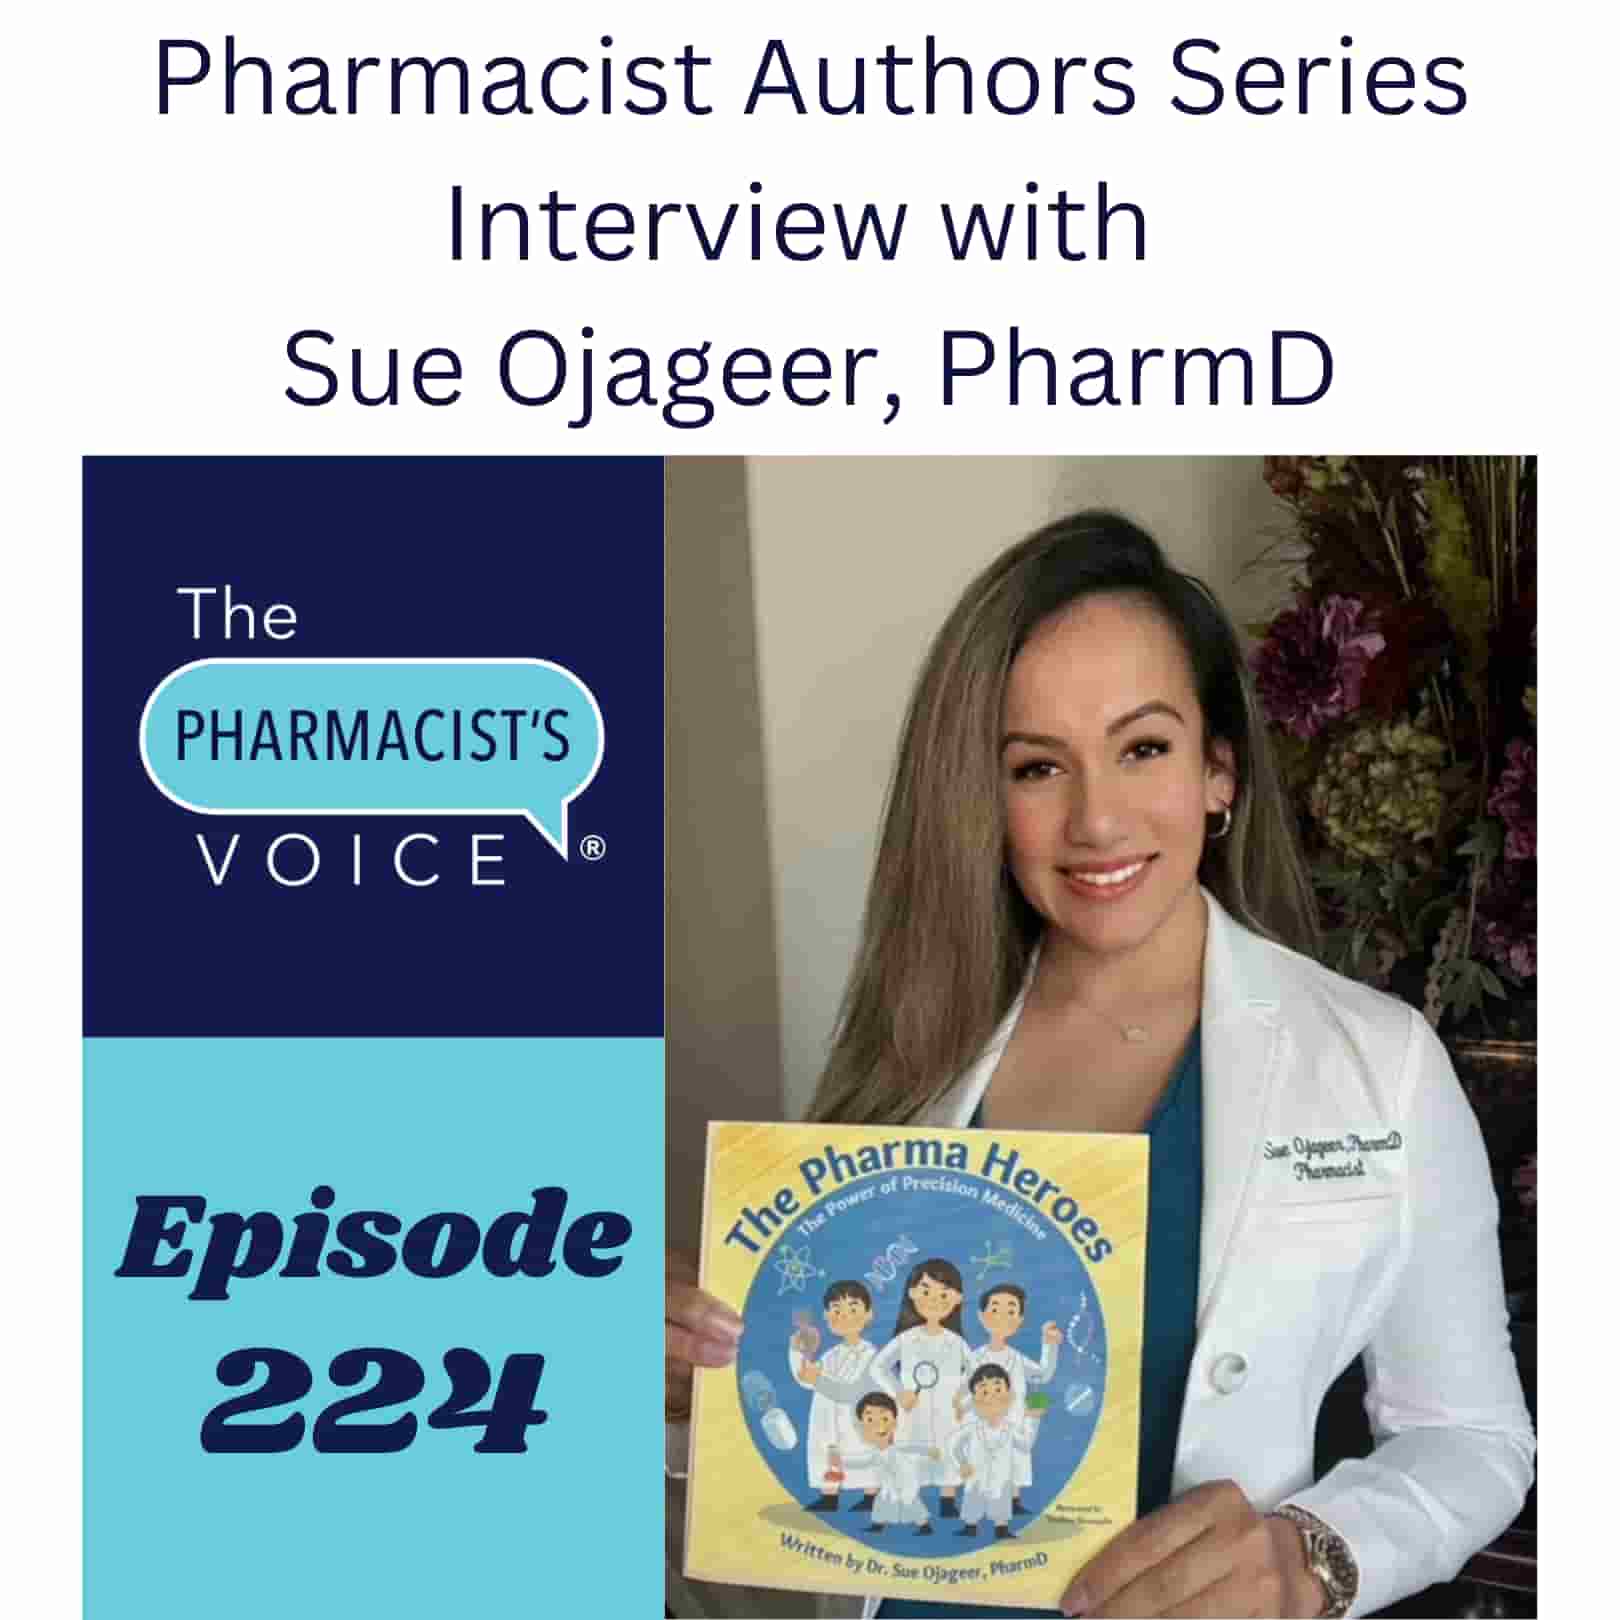 Pharmacist Authors Series Interview with Sue Ojageer, PharmD The Pharmacist's Voice Podcast Episode 224